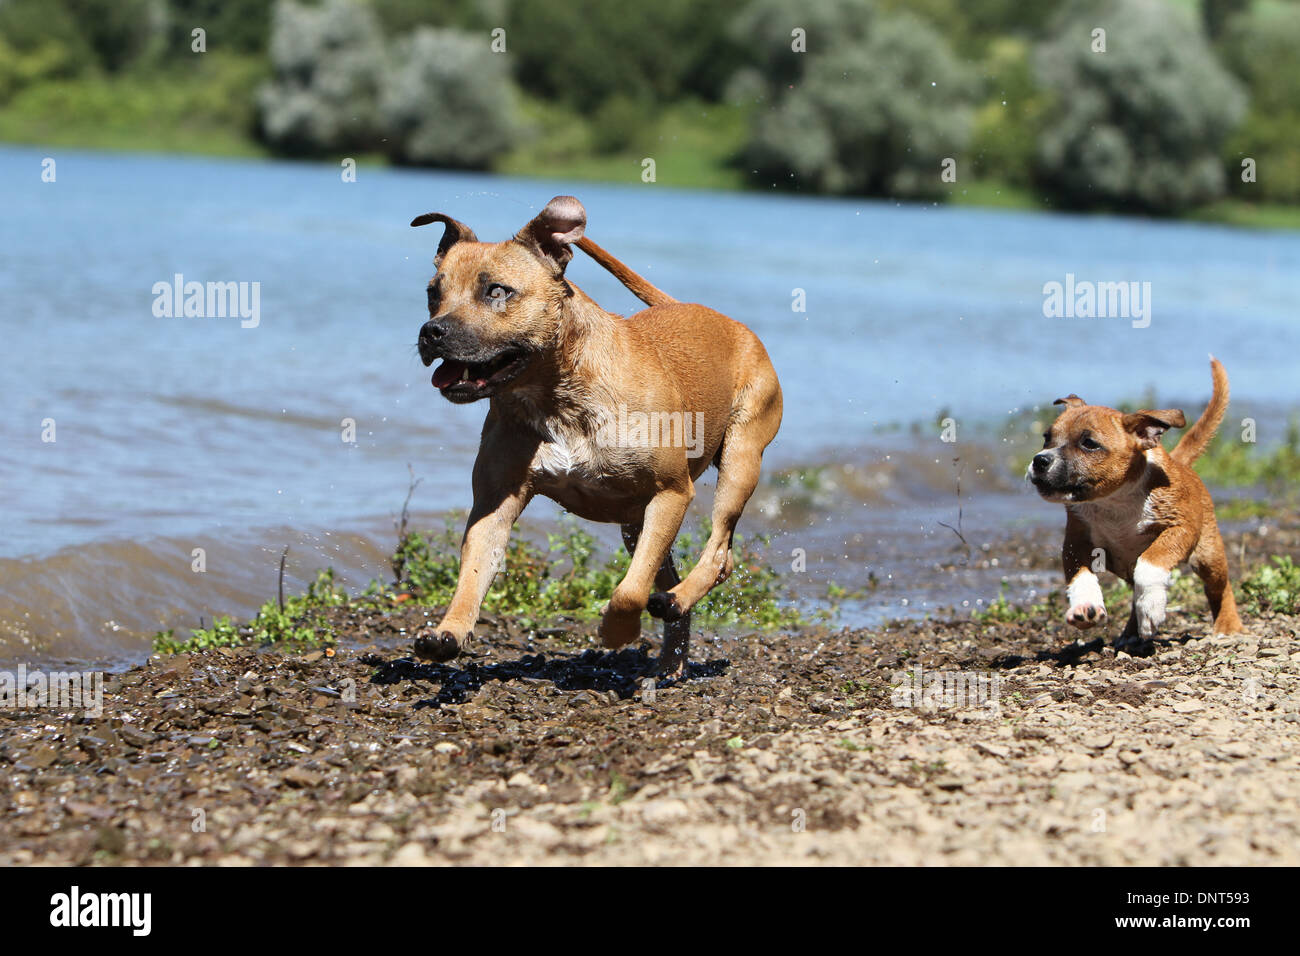 dog Staffordshire Bull Terrier / Staffie  adult and puppy running at the edge of a lake Stock Photo